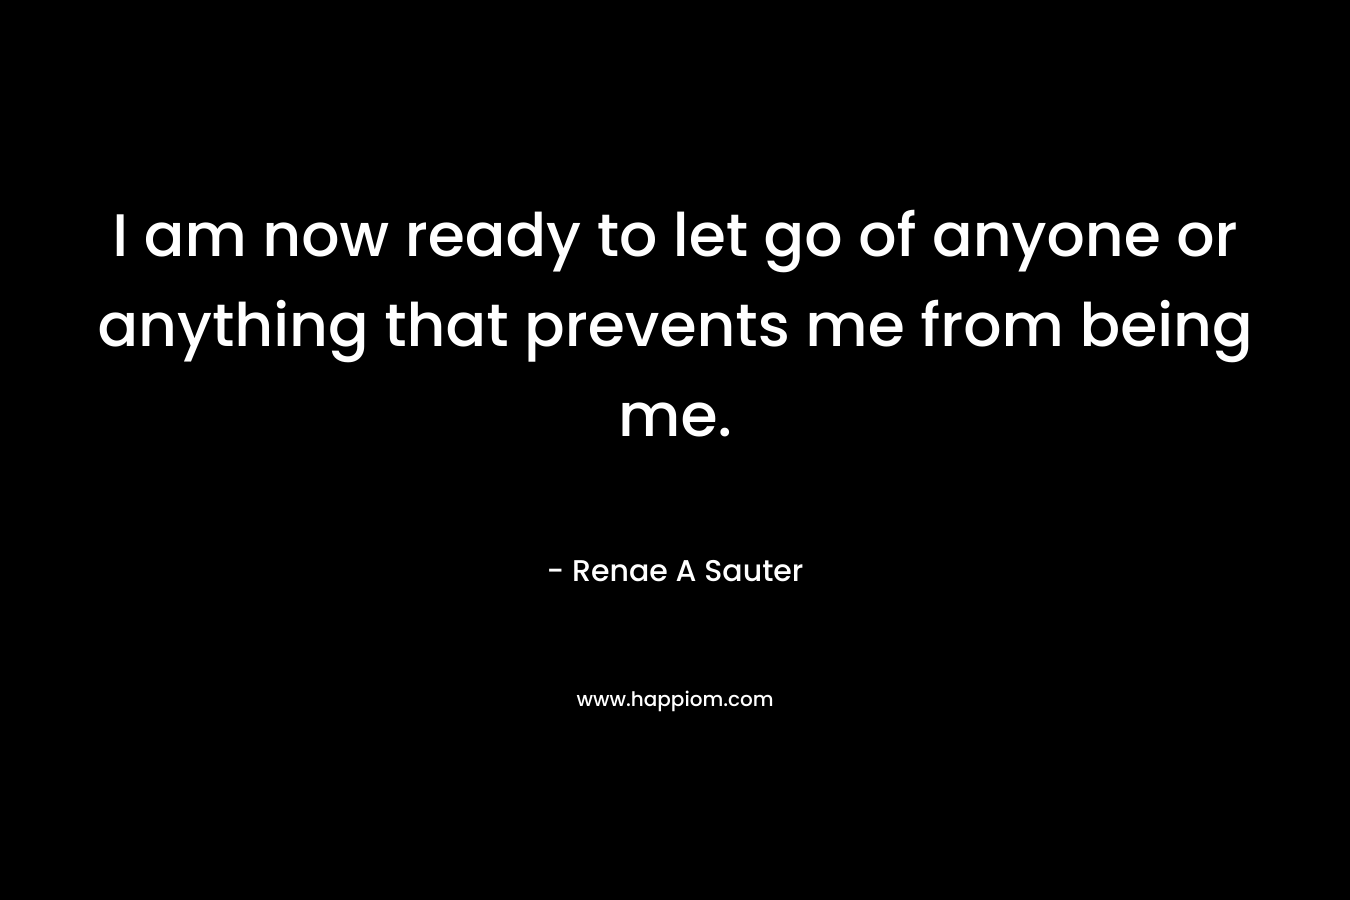 I am now ready to let go of anyone or anything that prevents me from being me.